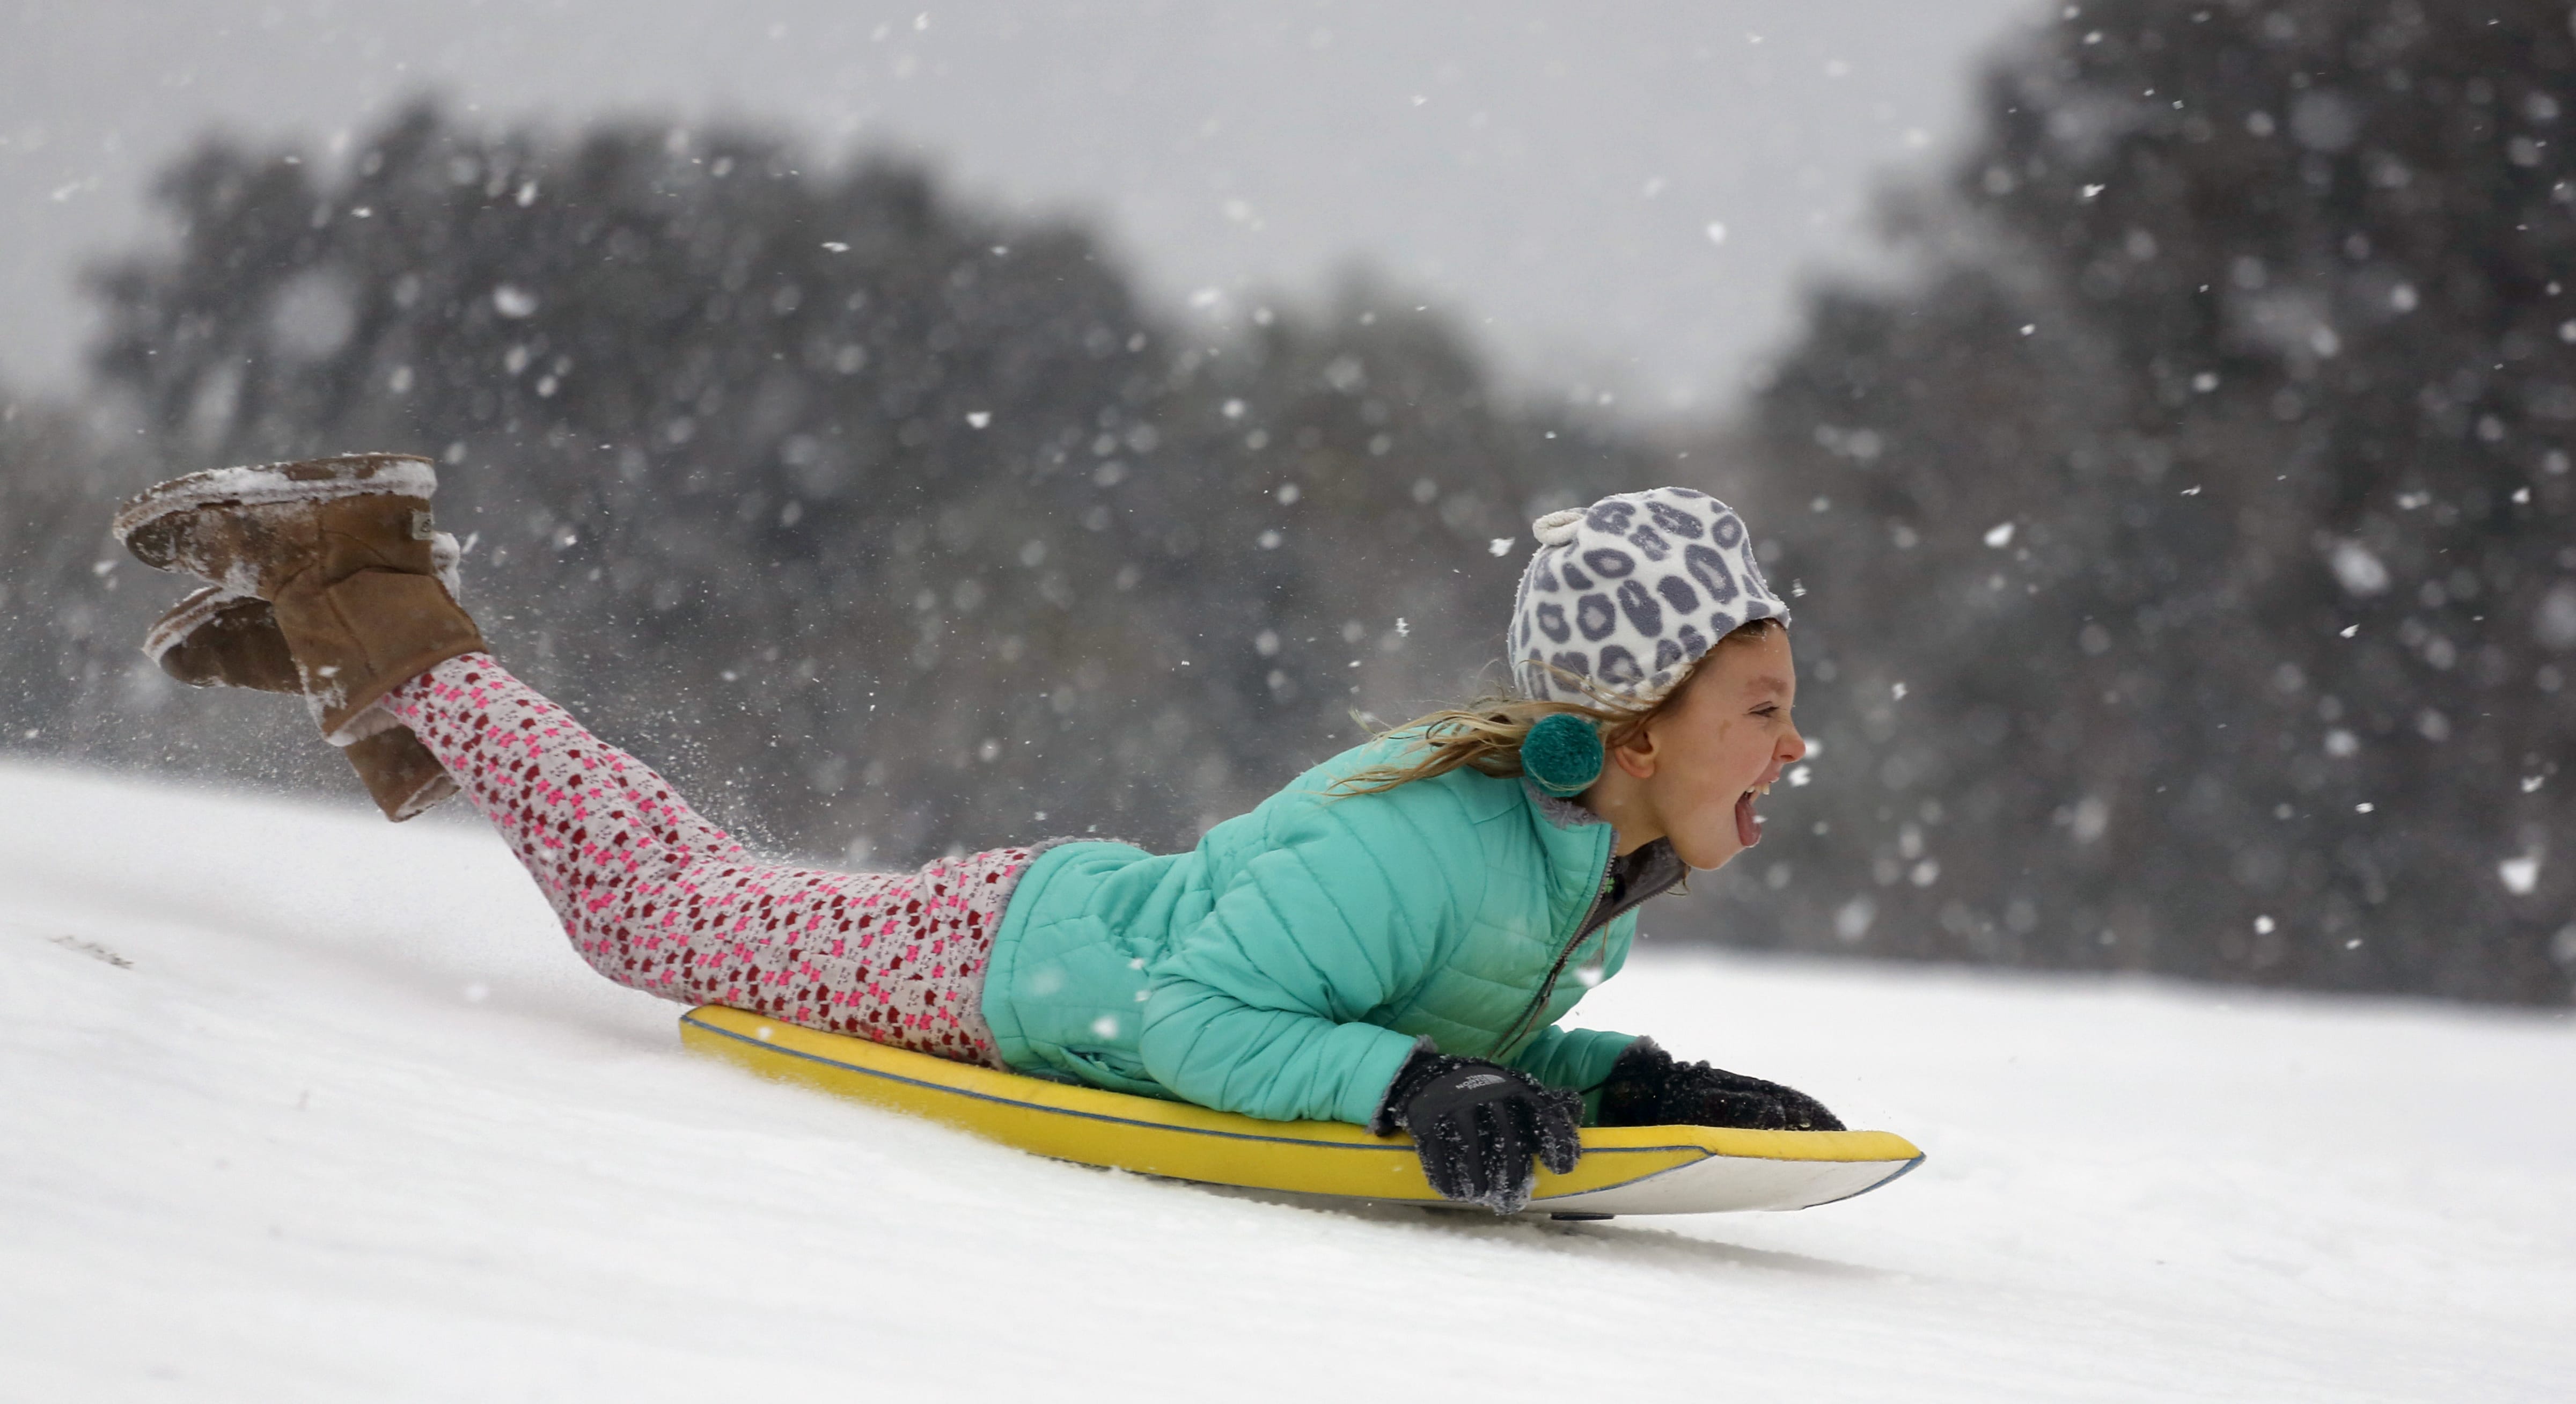 Finley Bork, 7, uses a boogie board, typically used on the beach, for sledding down a hill on a golf course at the Isle of Palms, S.C., Wednesday, Jan. 3, 2018.  A brutal winter storm smacked the coastal Southeast with a rare blast of snow and ice Wednesday, hitting parts of Florida, Georgia and South Carolina with their heaviest snowfall in nearly three decades.